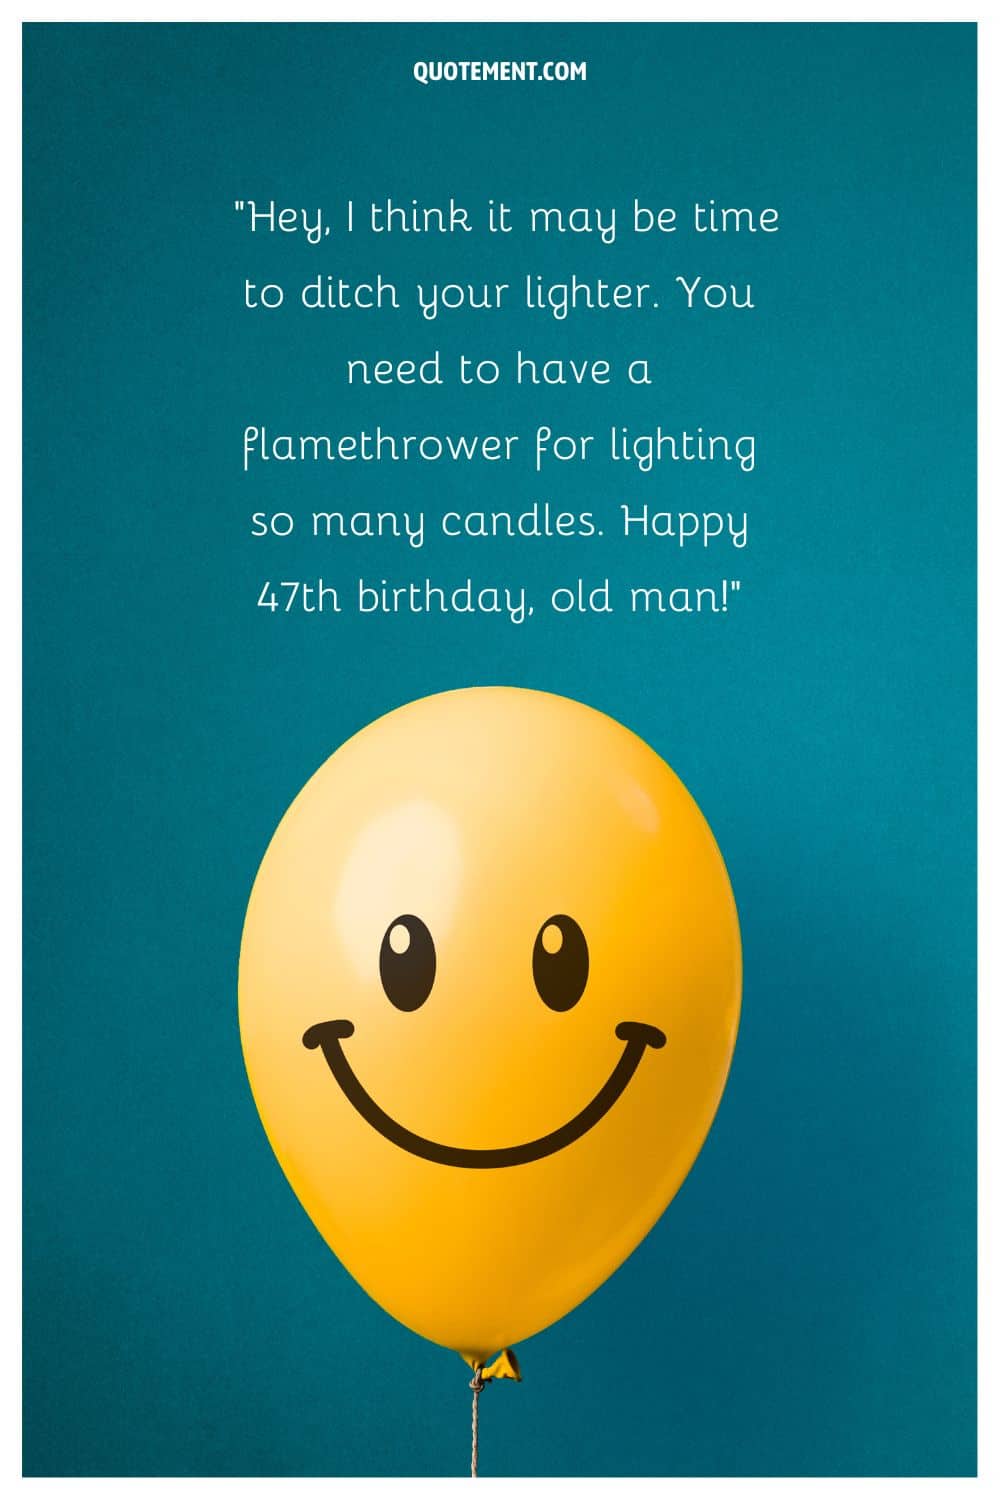 Hilarious message for their 47th birthday and a smiley face balloon
